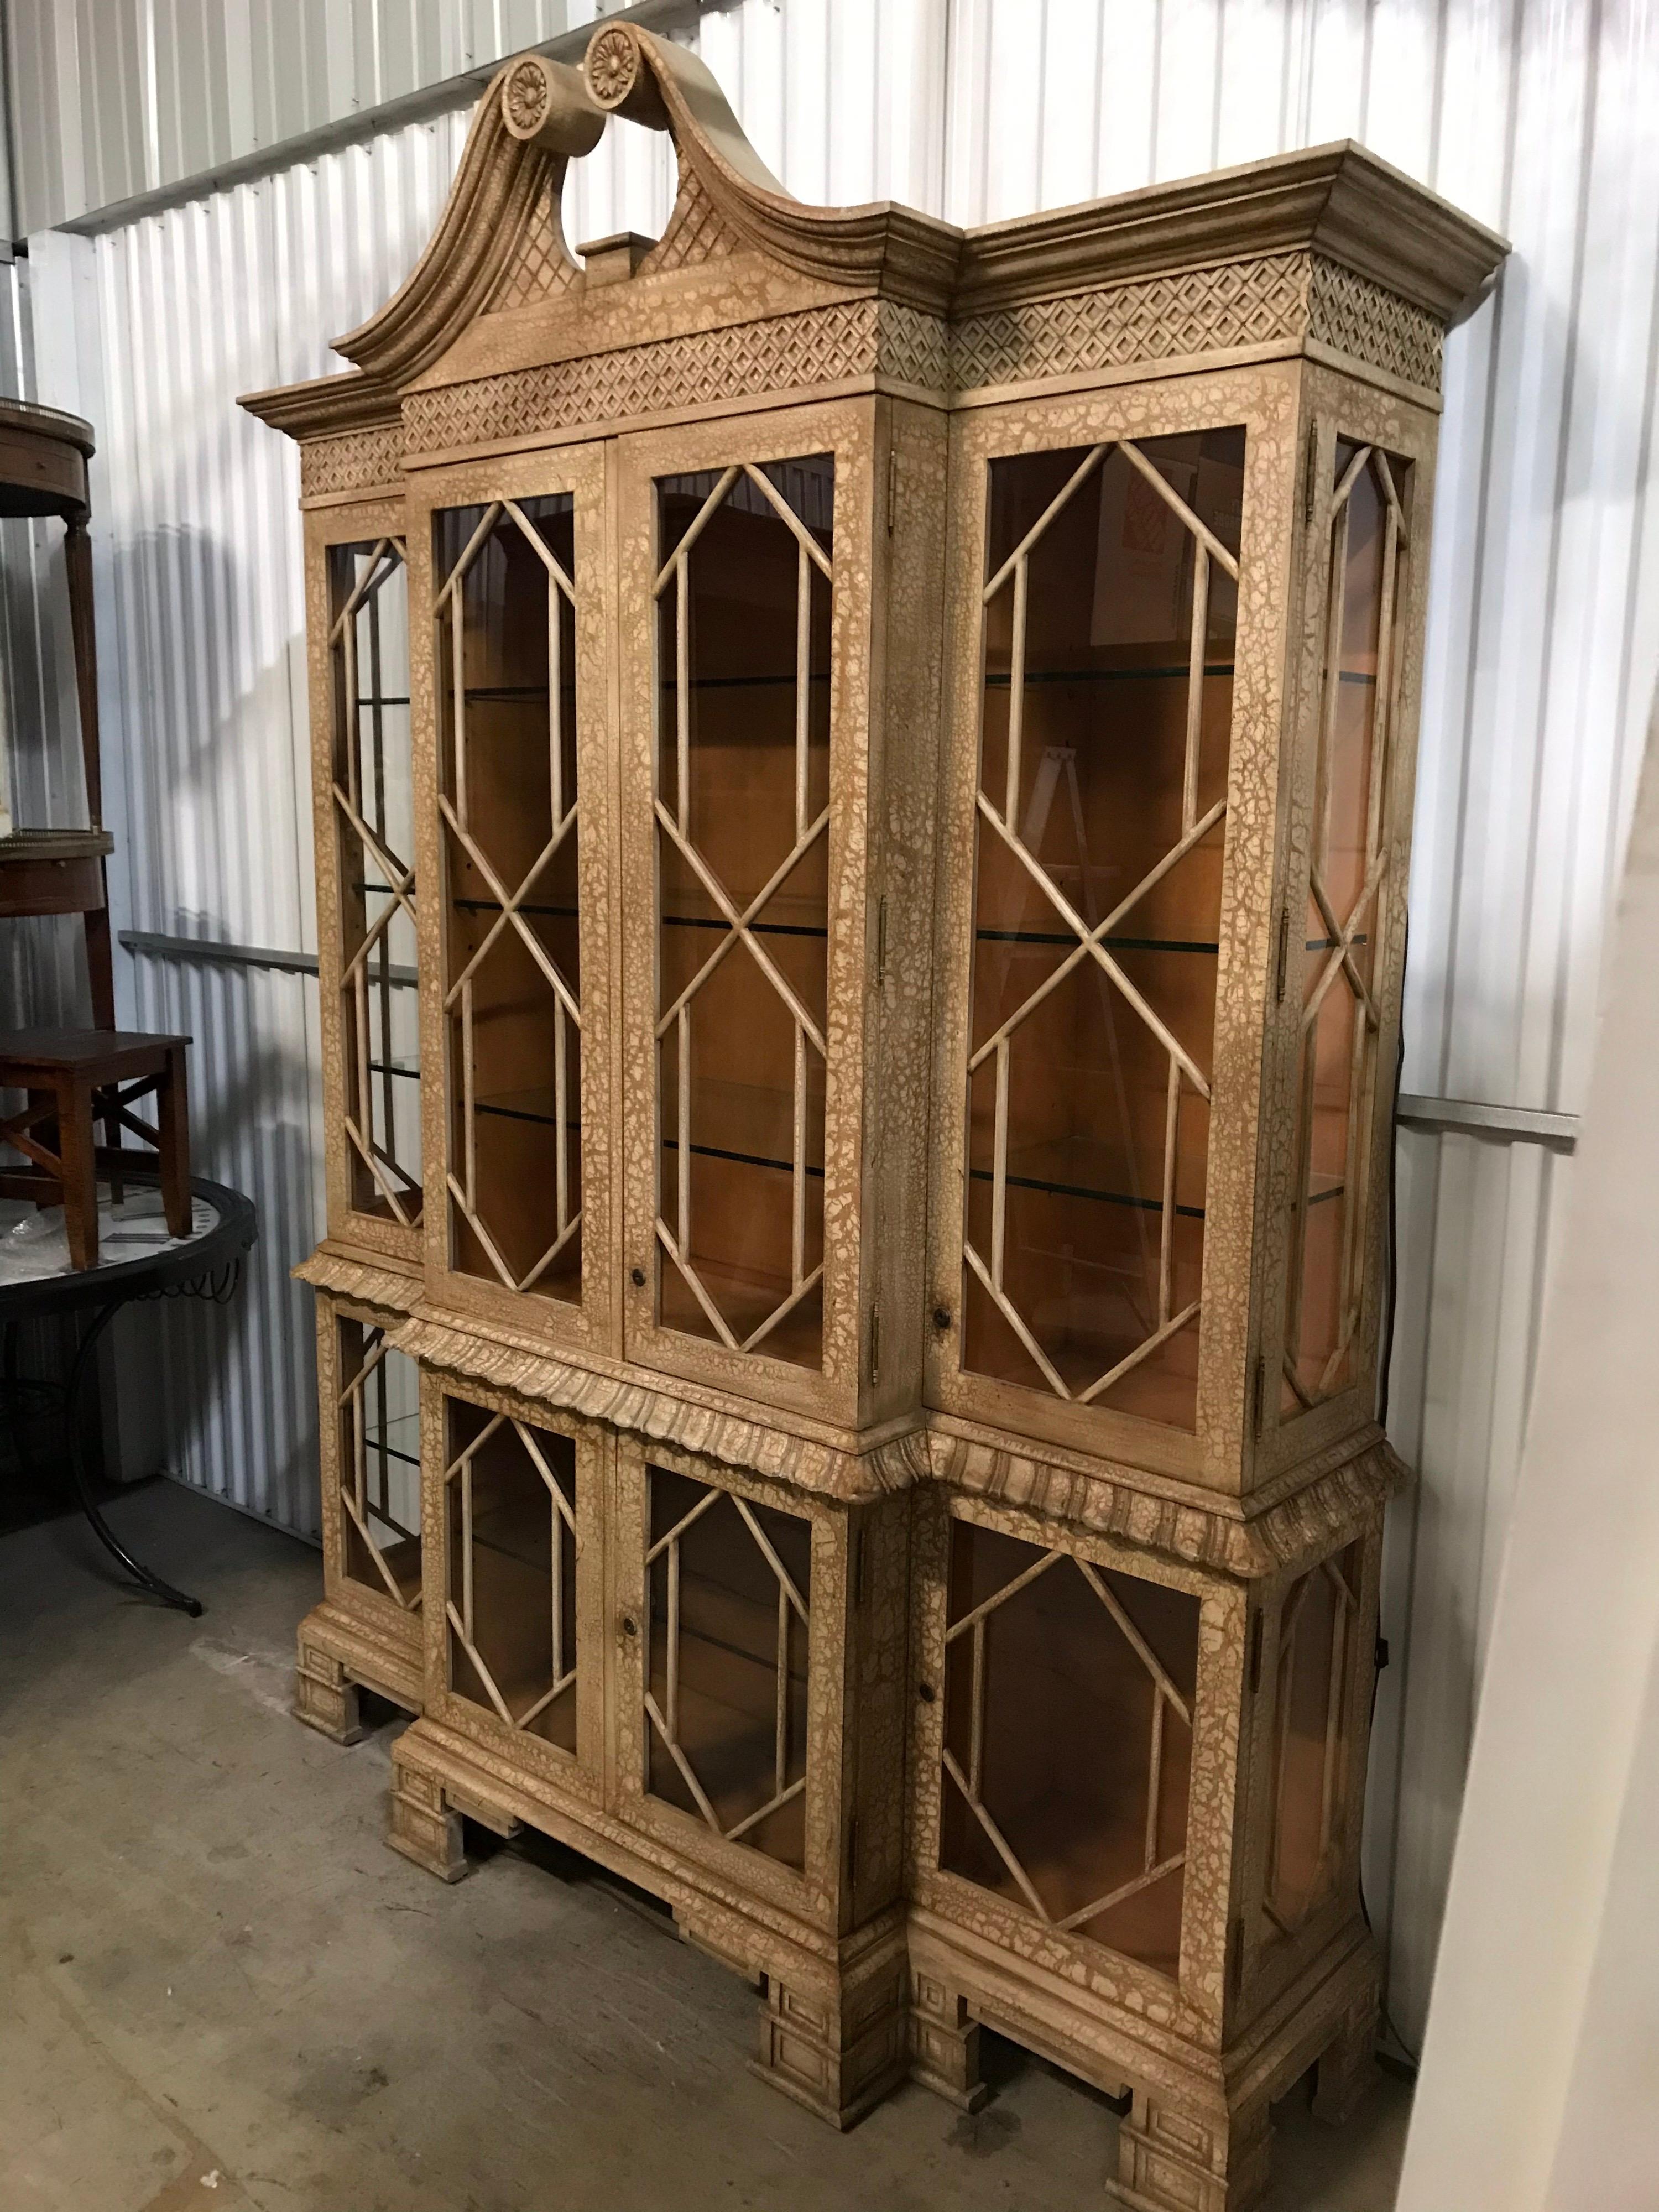 Very unique Pagoda style display cabinet with glass doors on both bottom and top. Both sections are illuminated. Beautiful fretwork detail trim.